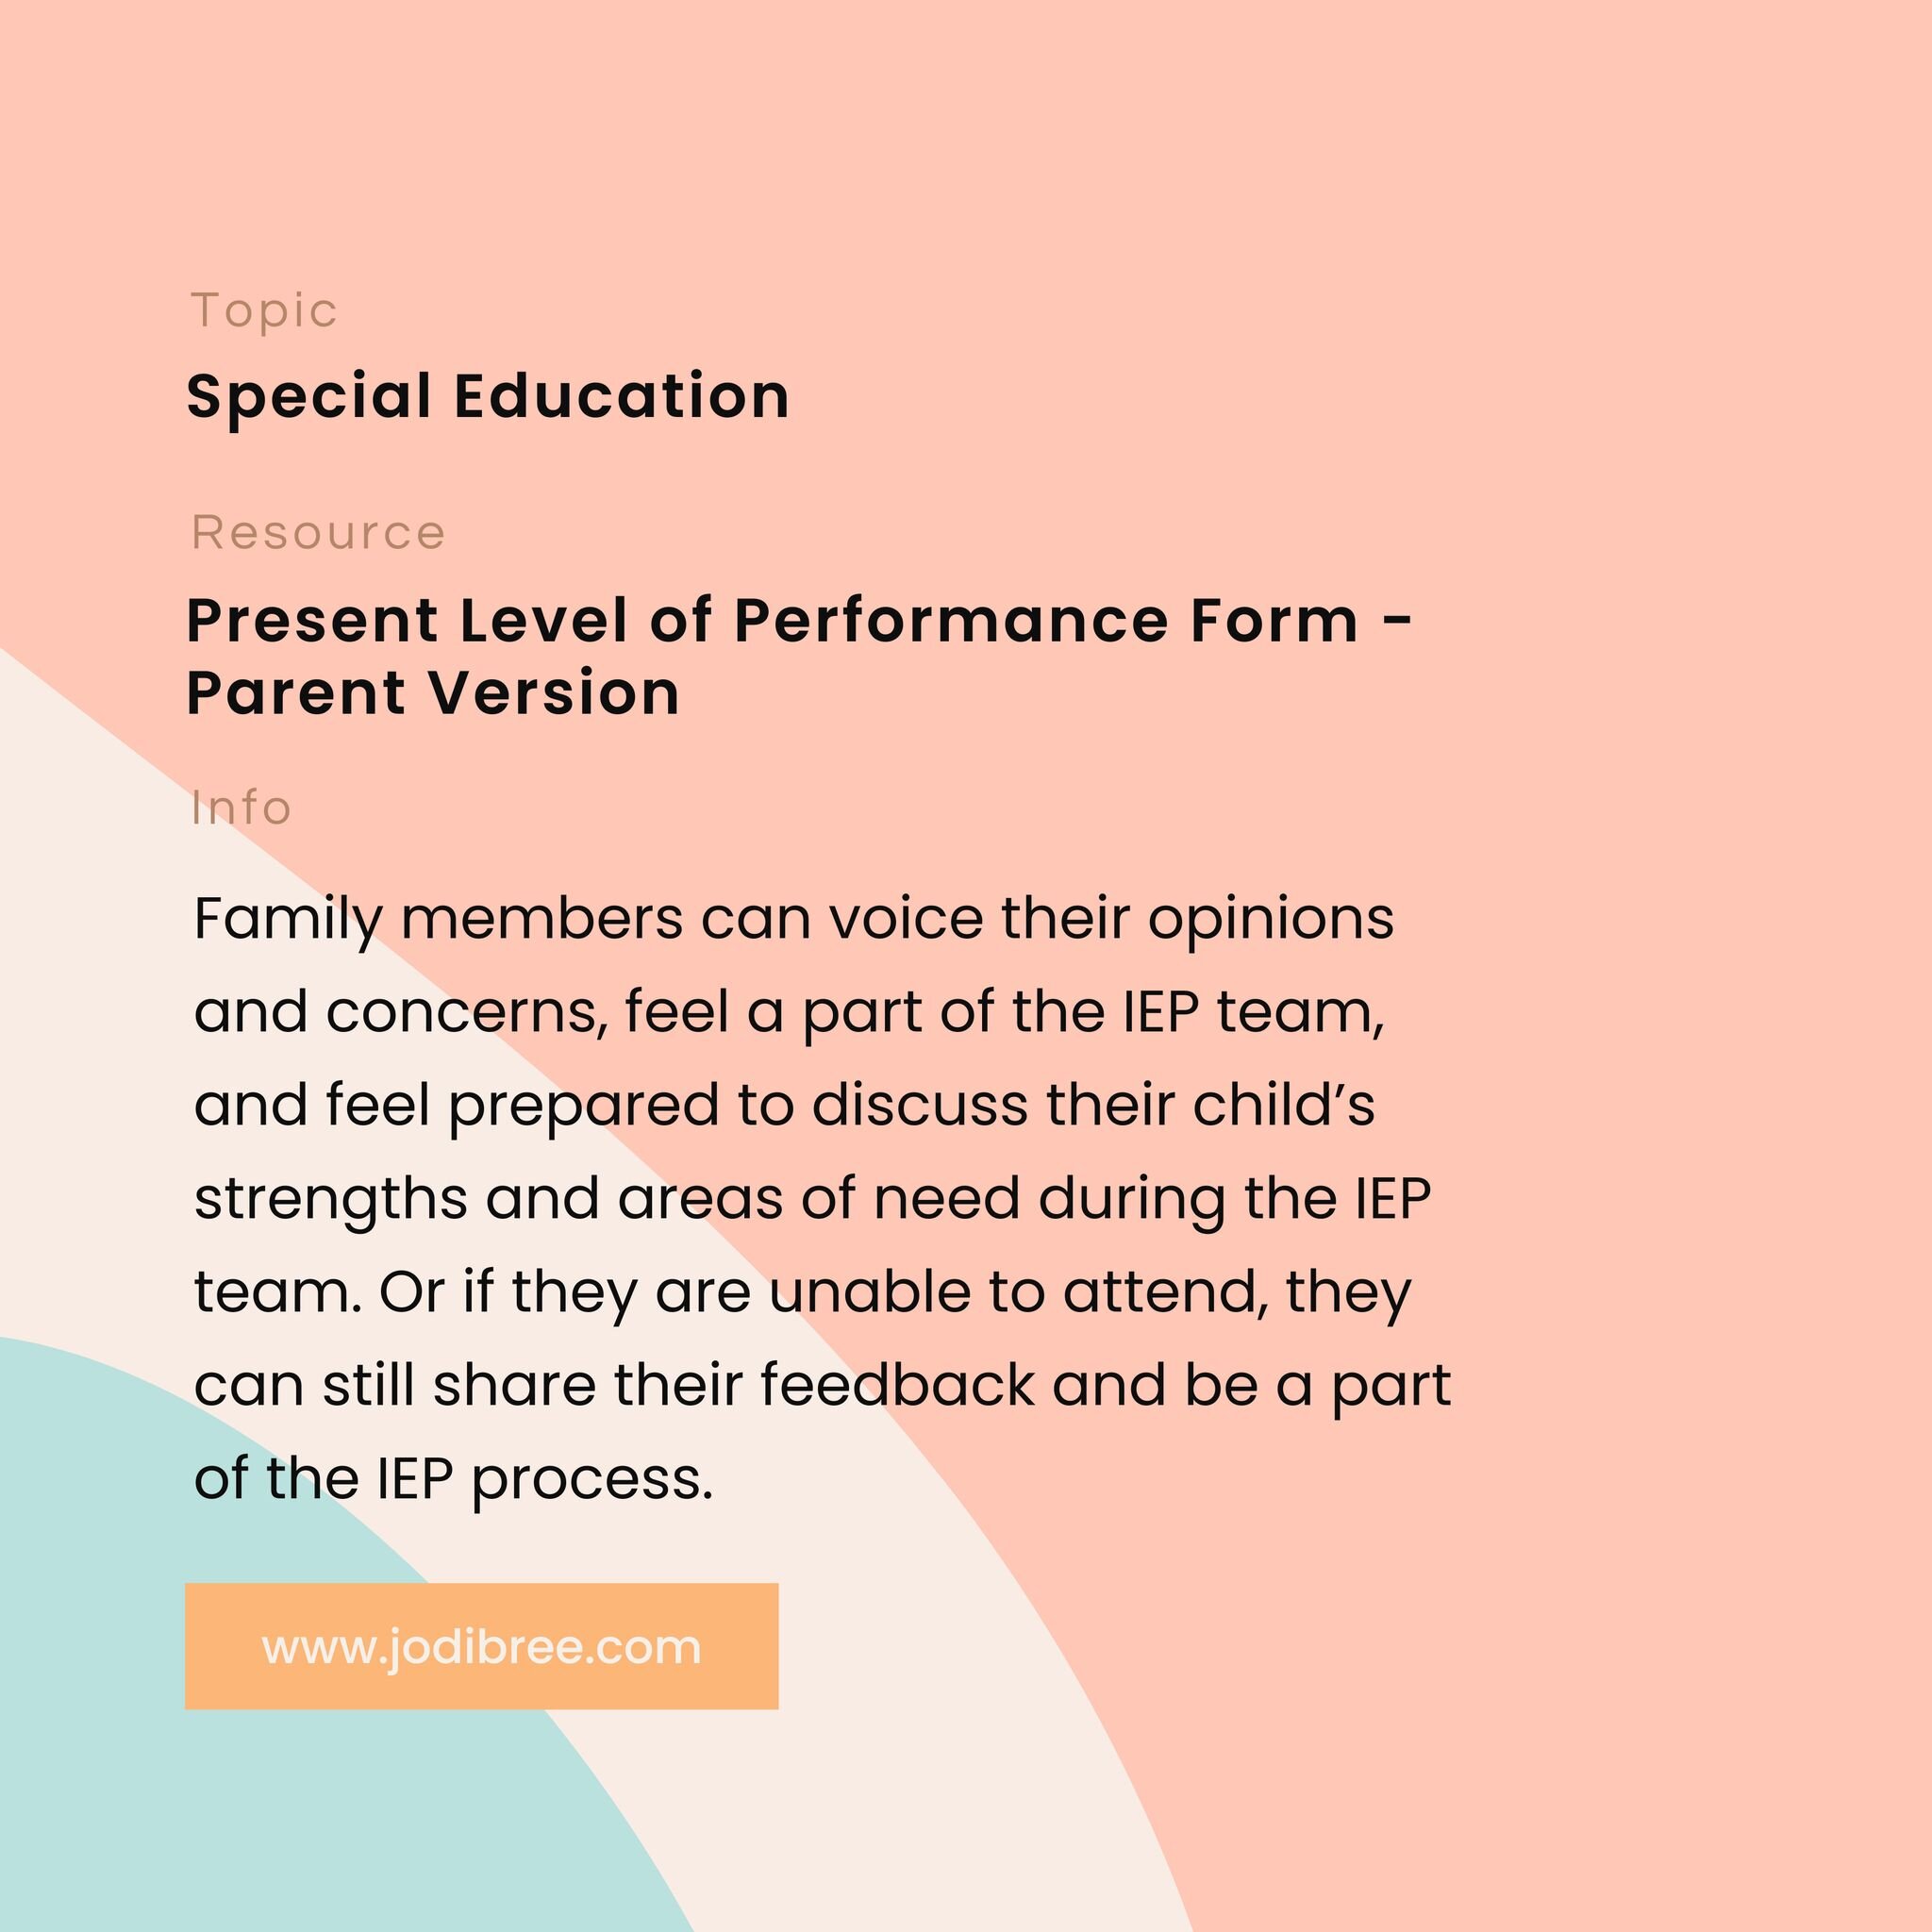 🤓 Special Ed - Parent Version - Present Level of Performance Form: Encourage Parent Participation with this IEP Form. Ask parents to share their experiences and insights, so that everyone can benefit from their knowledge. A great way to gather insig